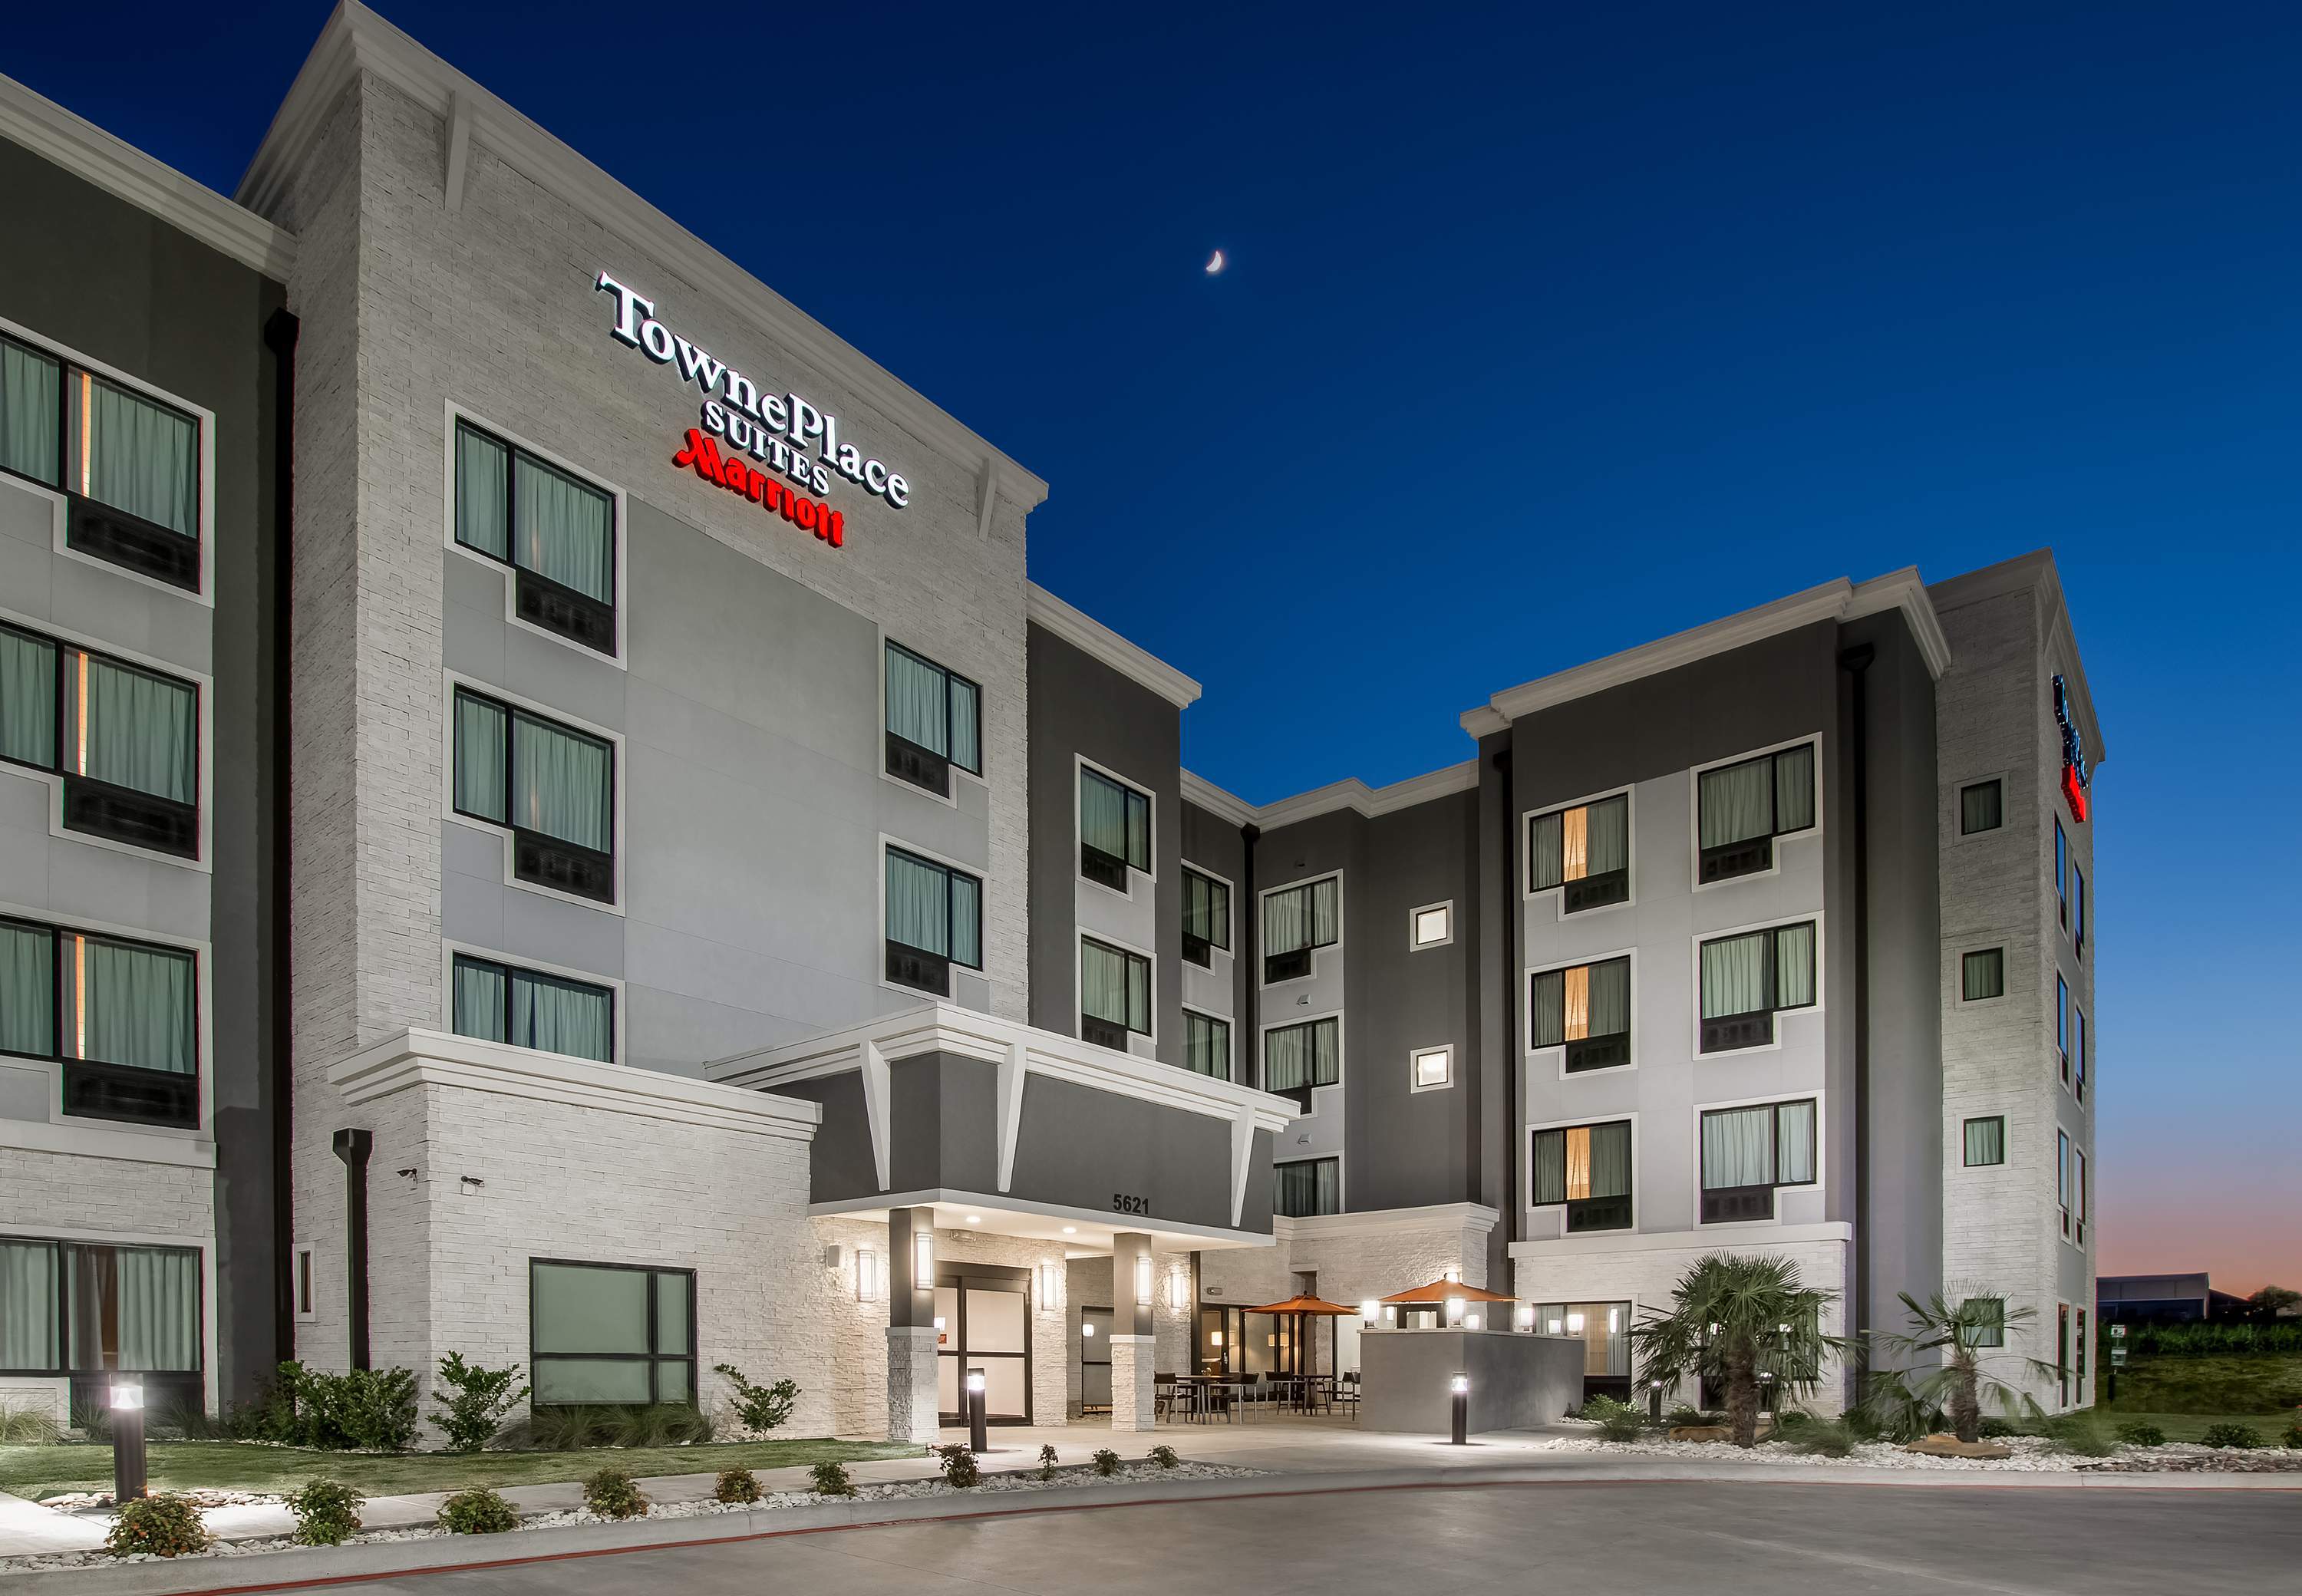 Photo of TownePlace Suites Waco South, Waco, TX